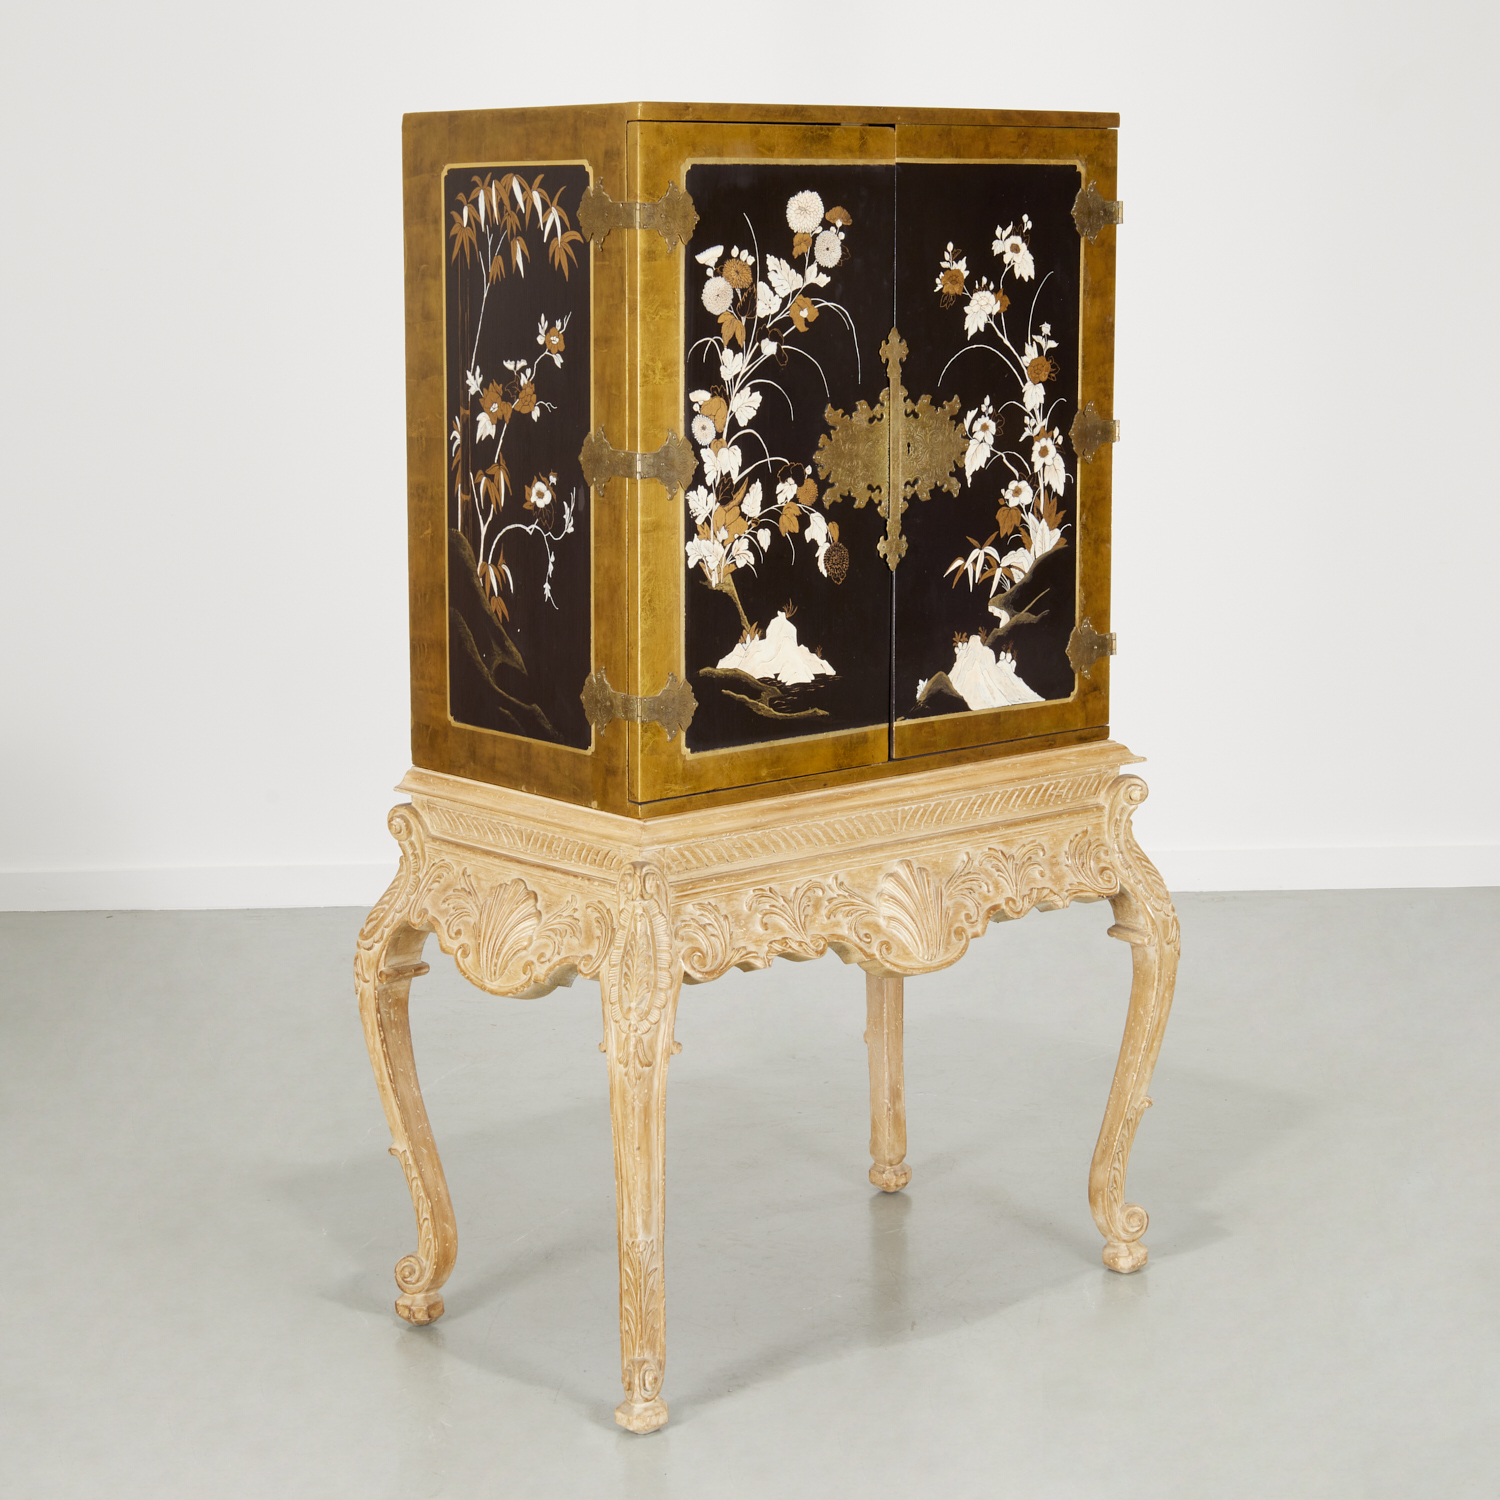 GEORGE I STYLE CHINOISERIE CABINET 2fb3fd